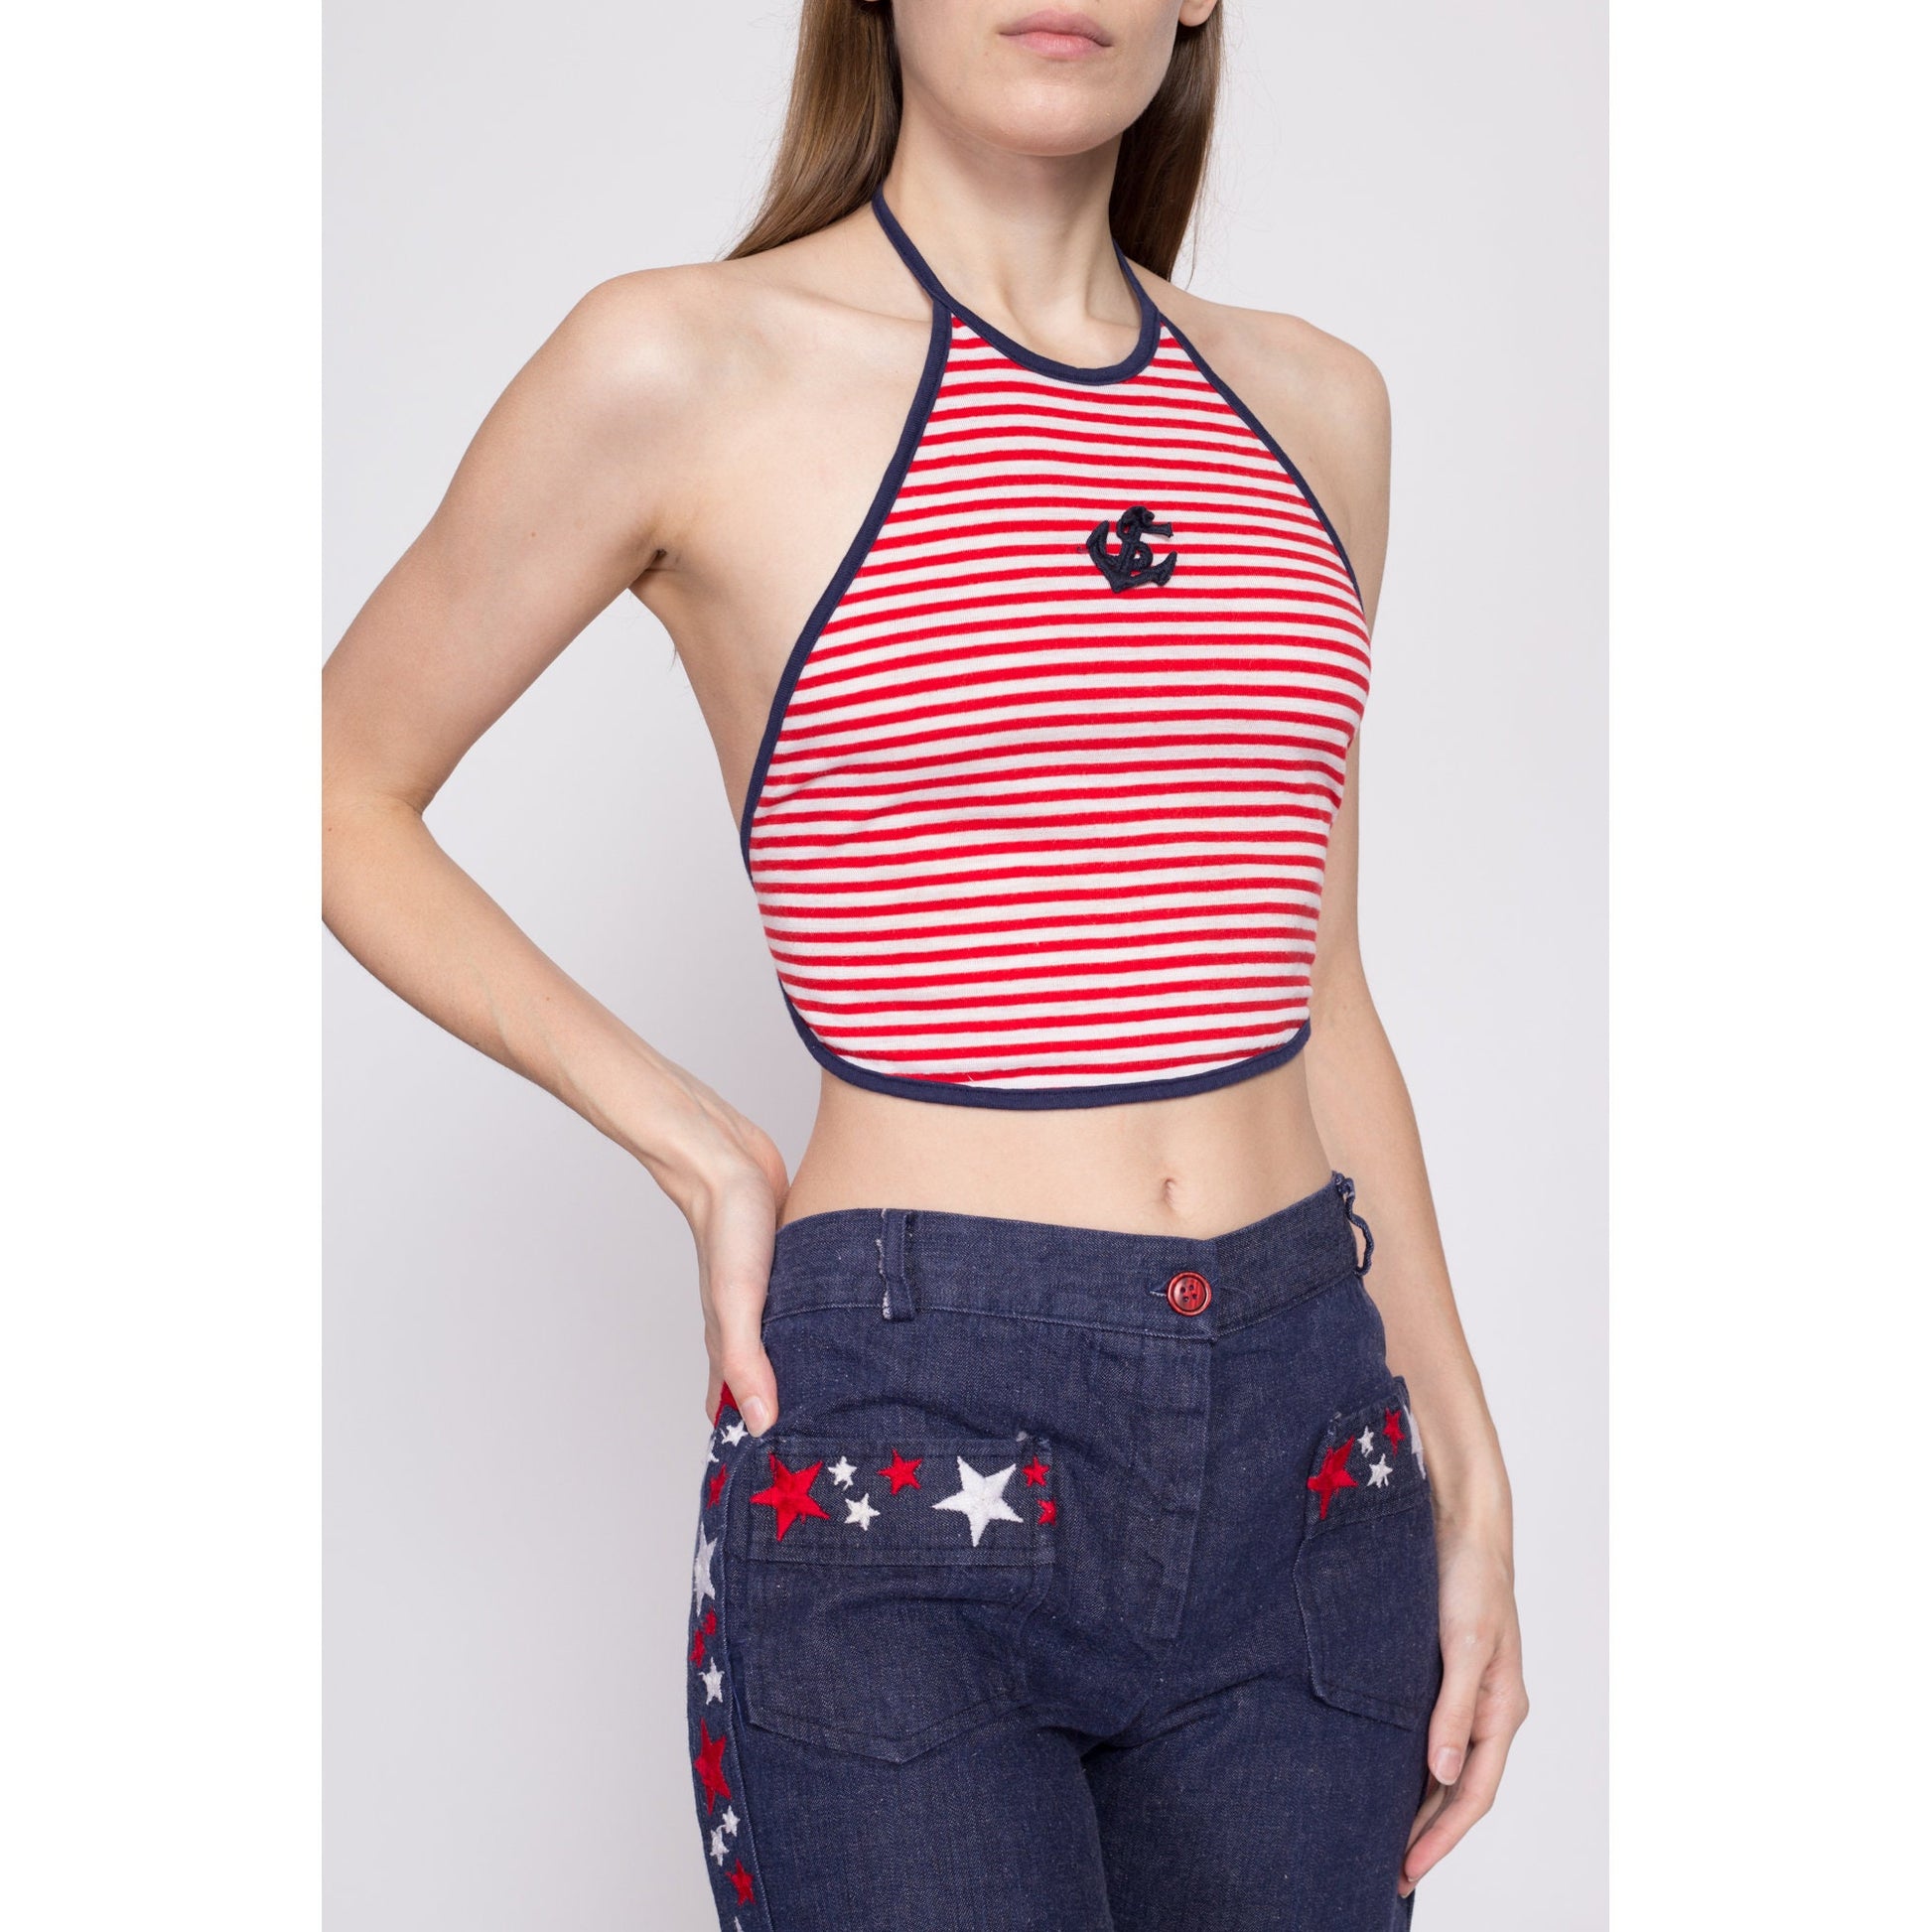 70s Nautical Striped Backless Halter Crop Top - Small – Flying